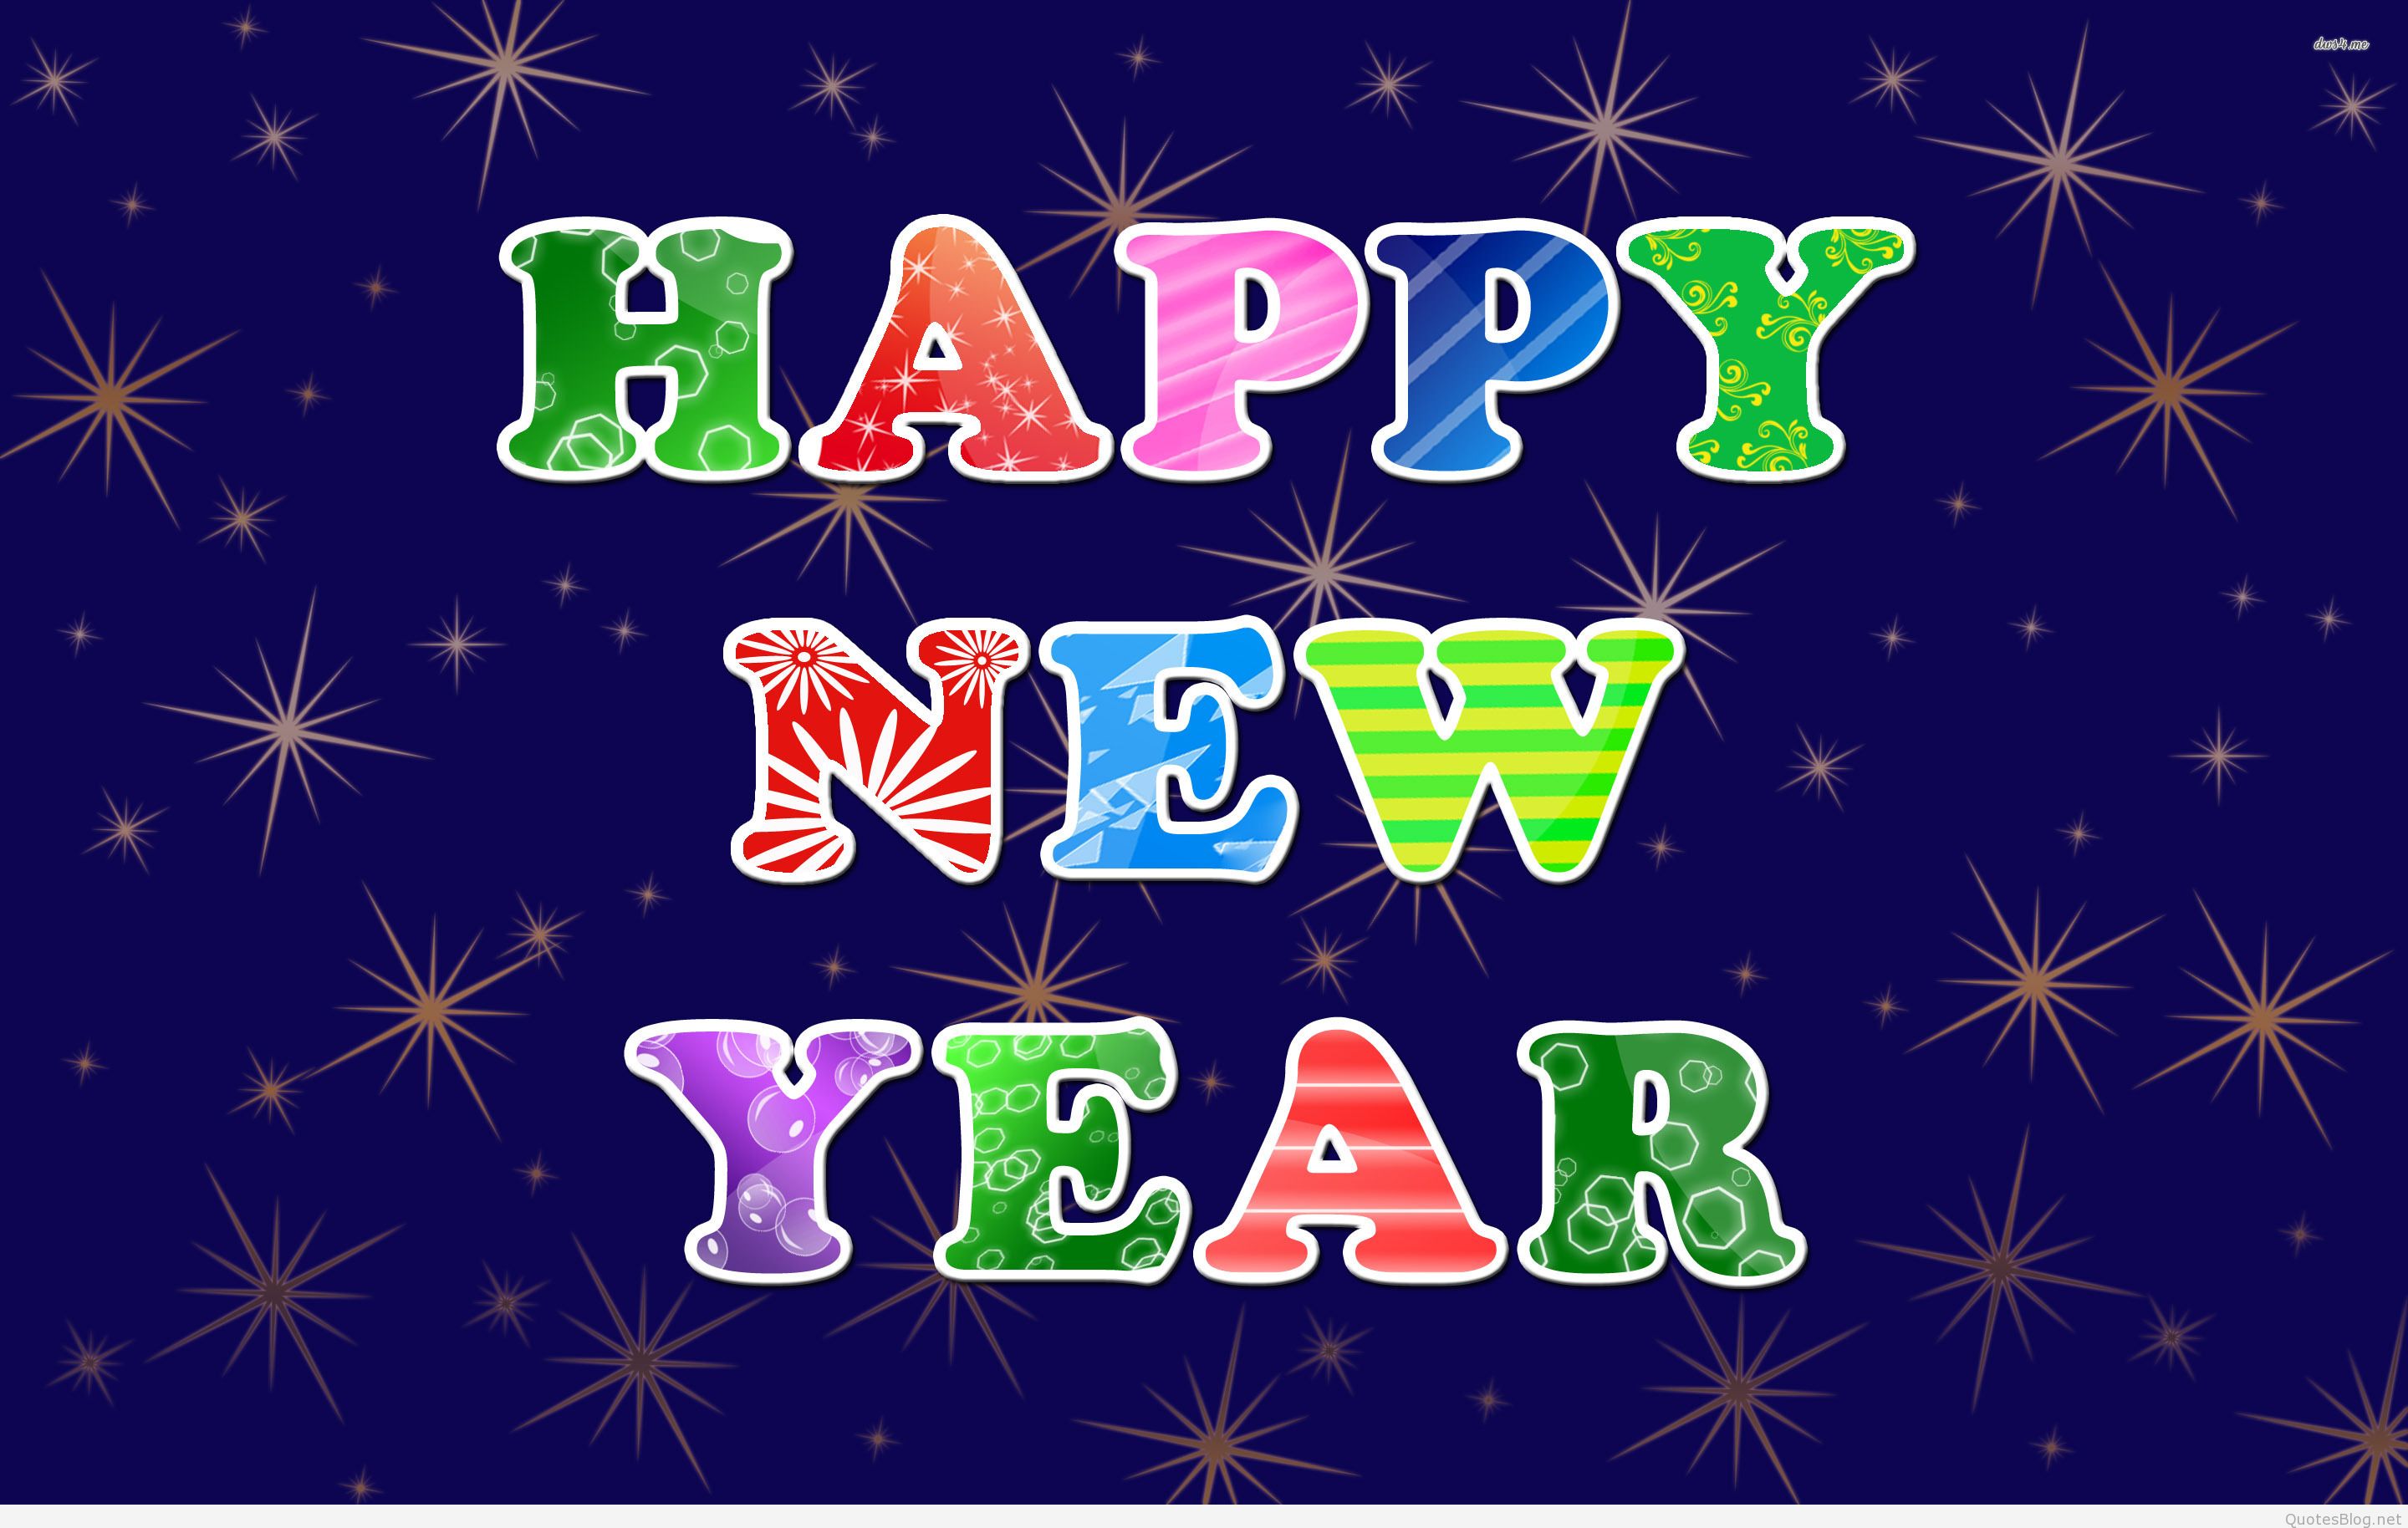 Happy new year backgrounds wallpapers 2016